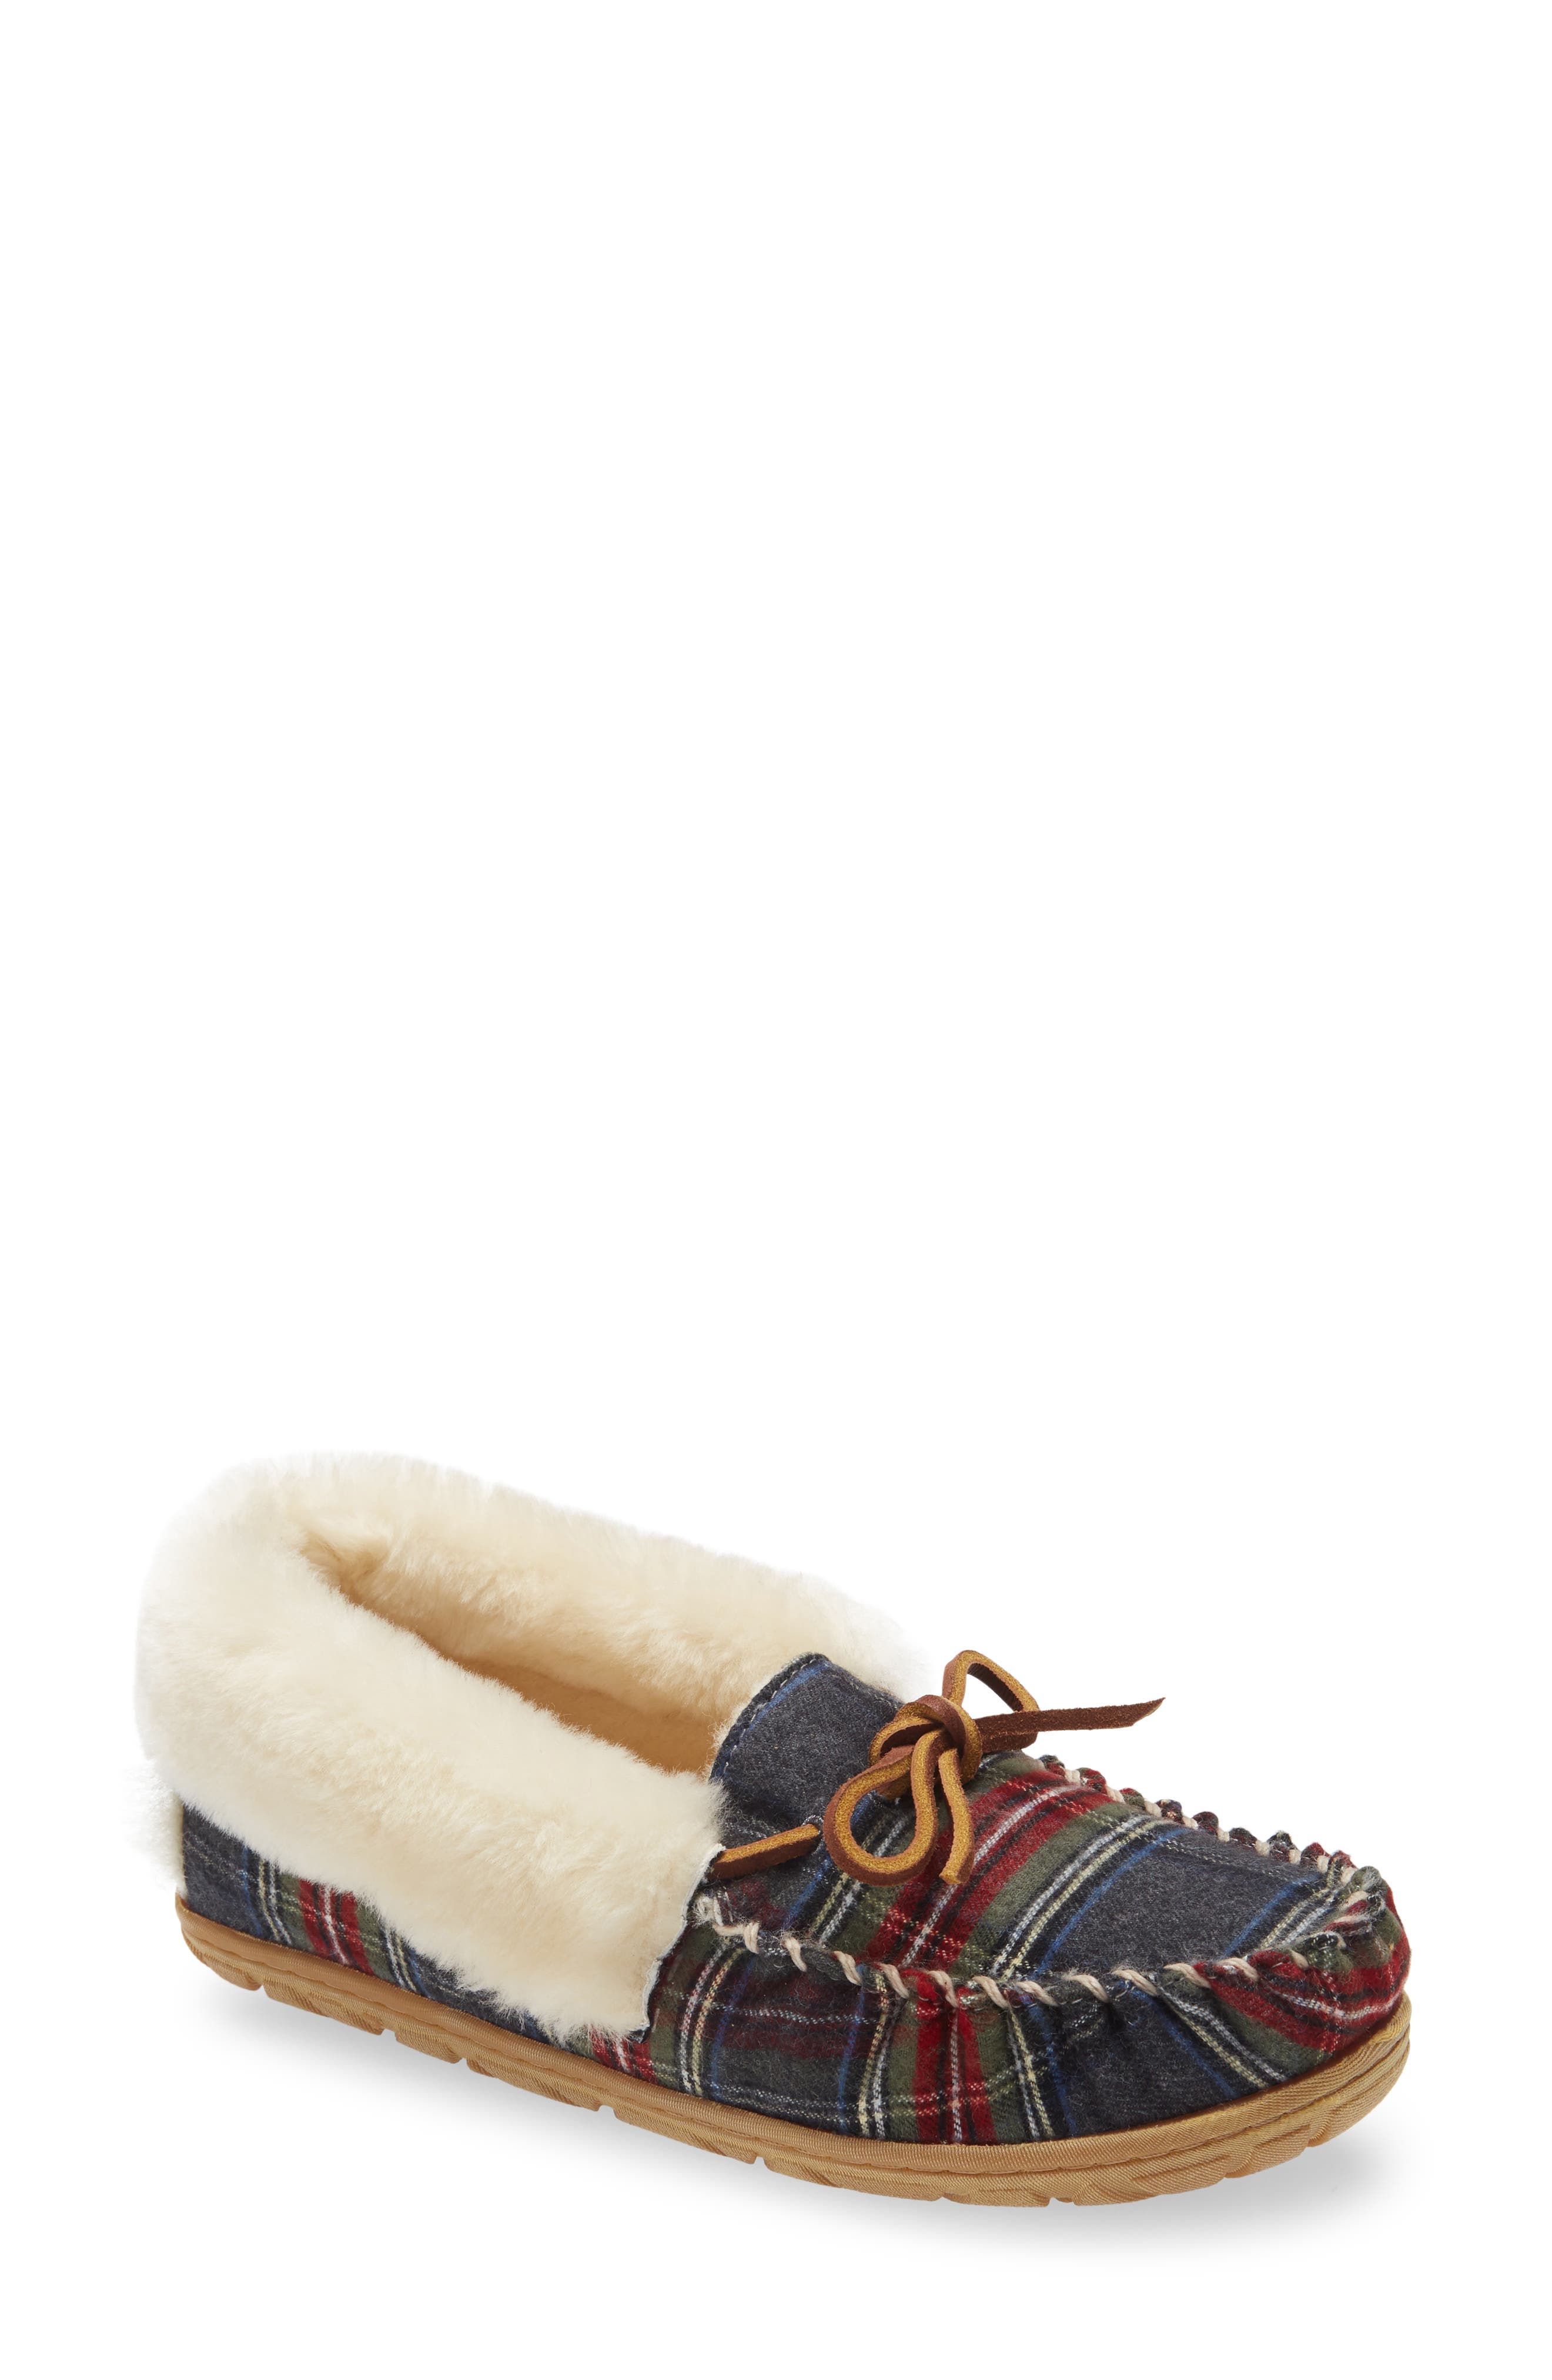 Women's Moccasins Shoes | Nordstrom